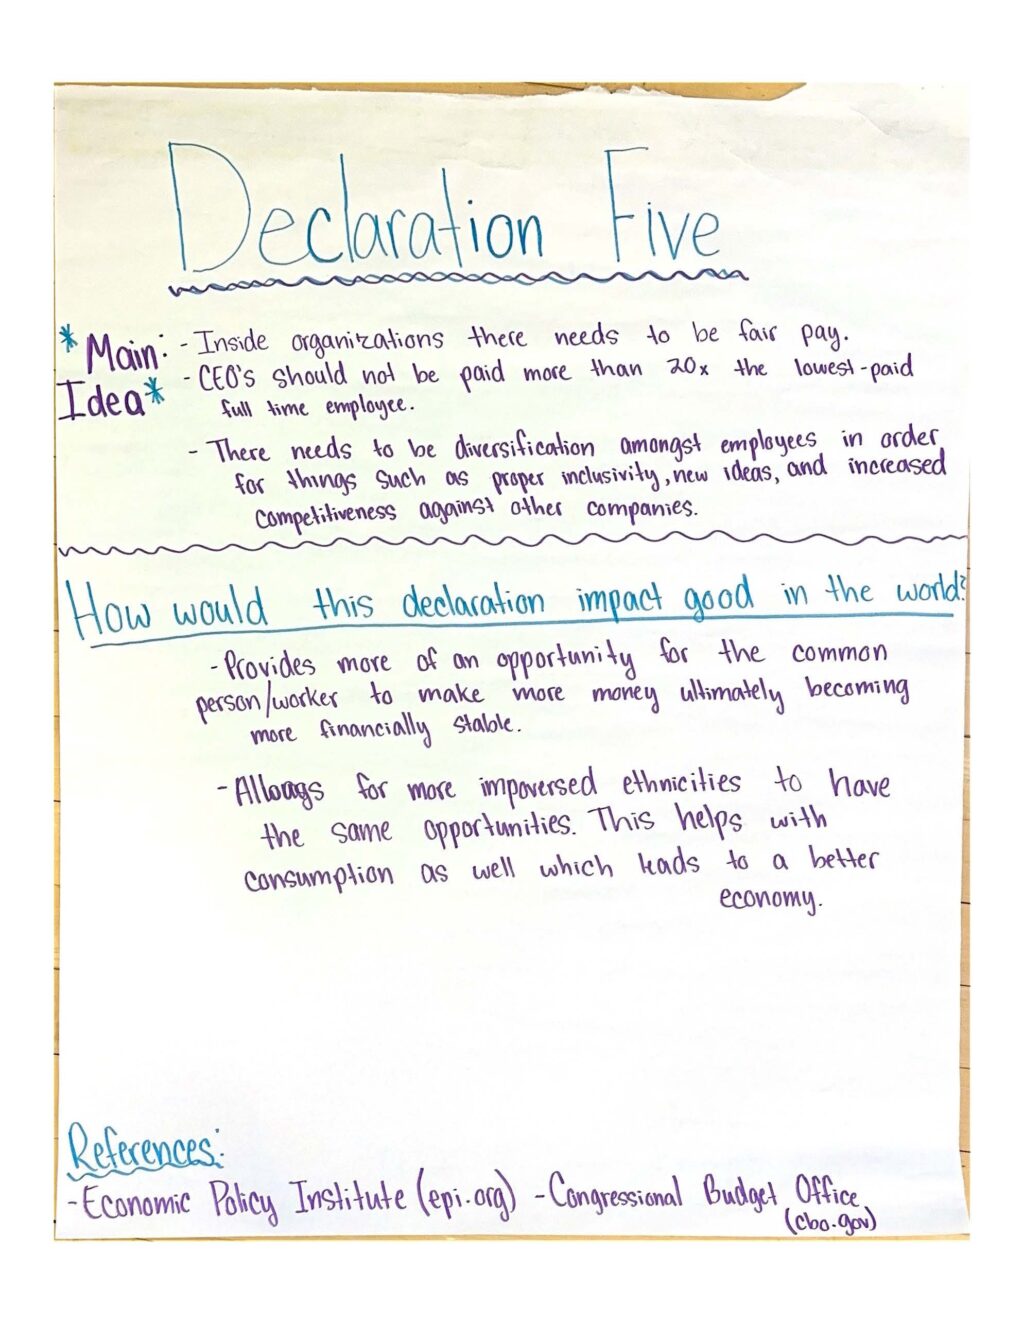 Handwritten note highlighting the basic ideas behind declaration five from the book, "The Mission Corporation: How contemporary capitalism can change the world one business at a time"